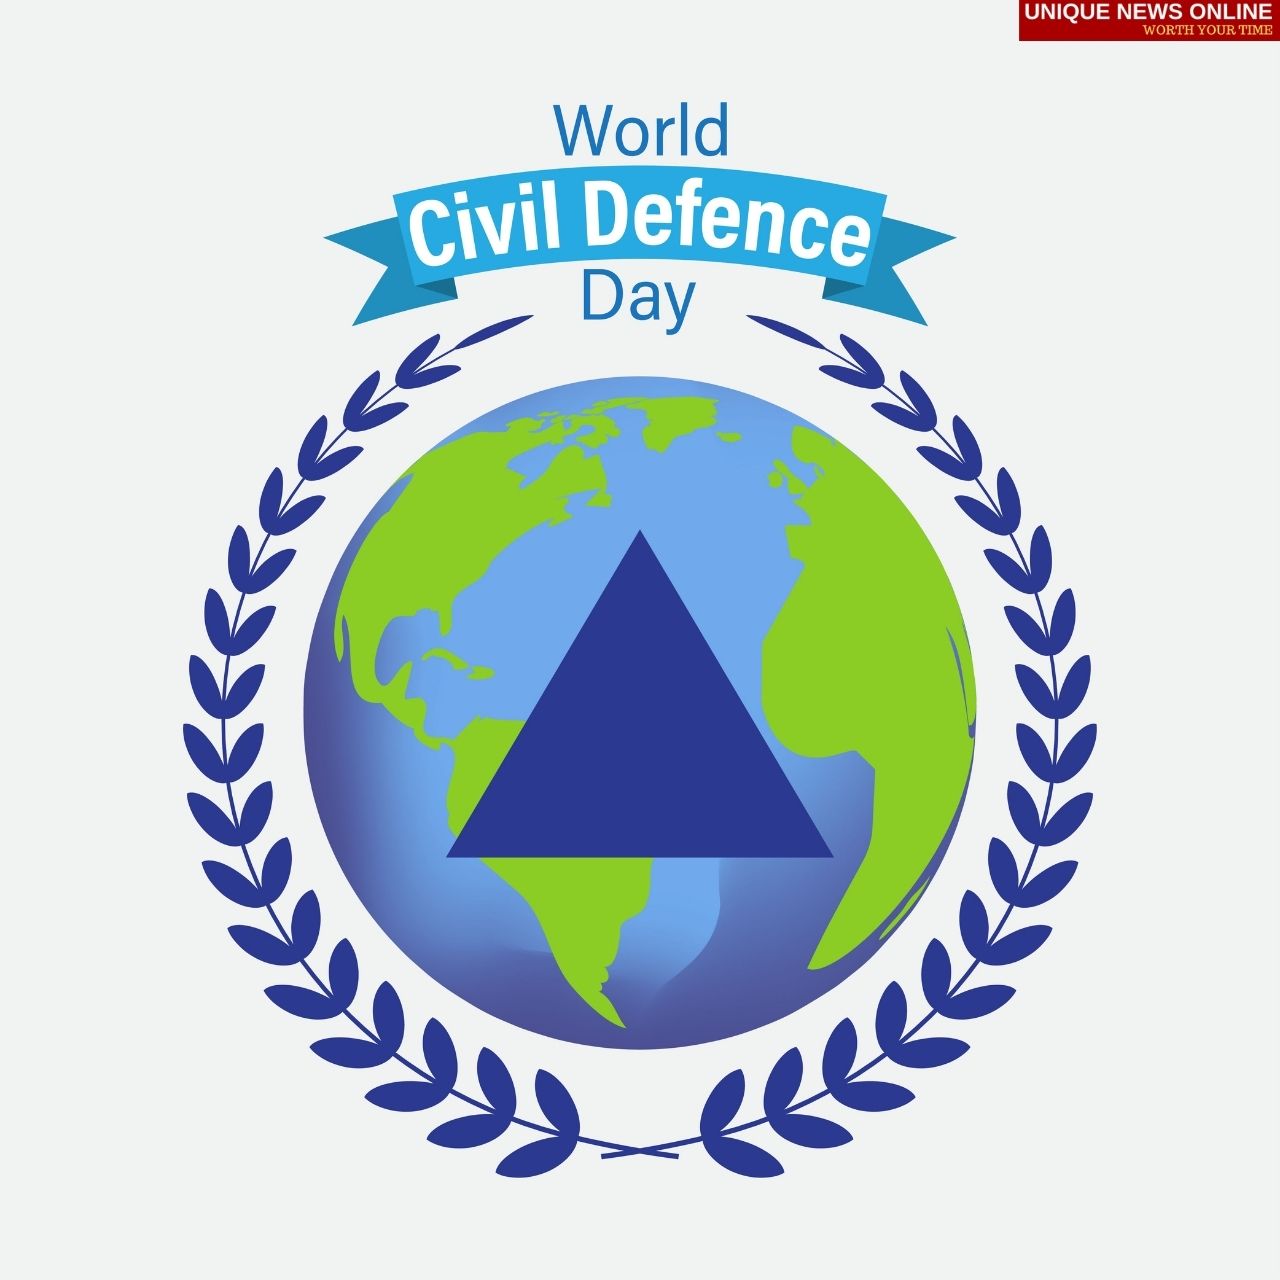 World Civil Defence Day 2022 Quotes, Posters, HD Images, Slogans, Wishes to make people aware of the critical role of civil defense